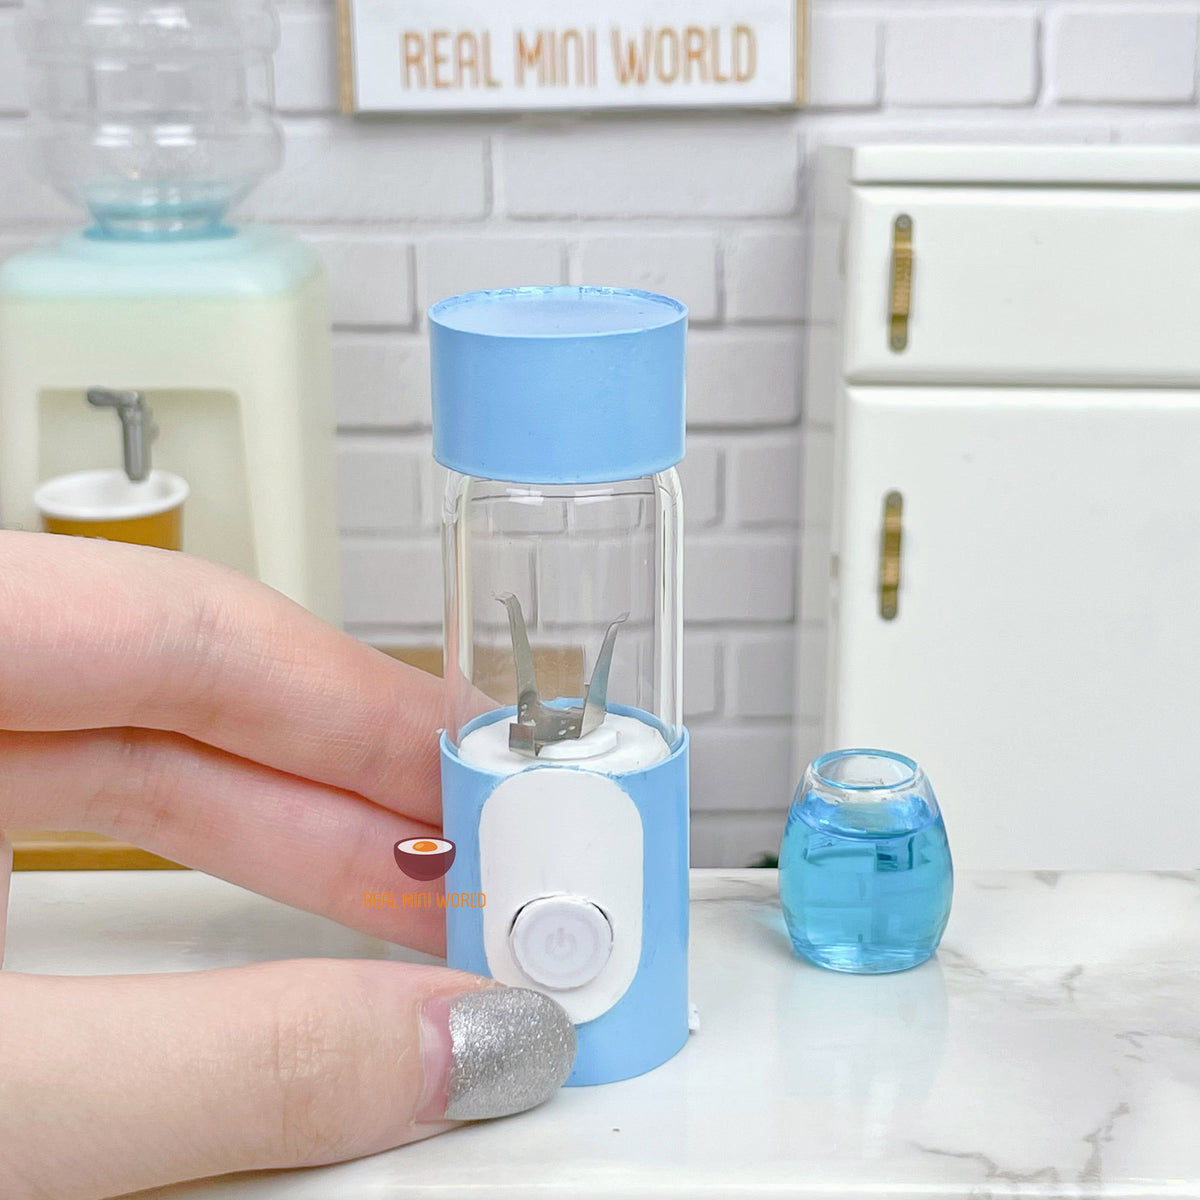 Miniature Real Working Blender SkyBlue: Mini Cooking Kitchen